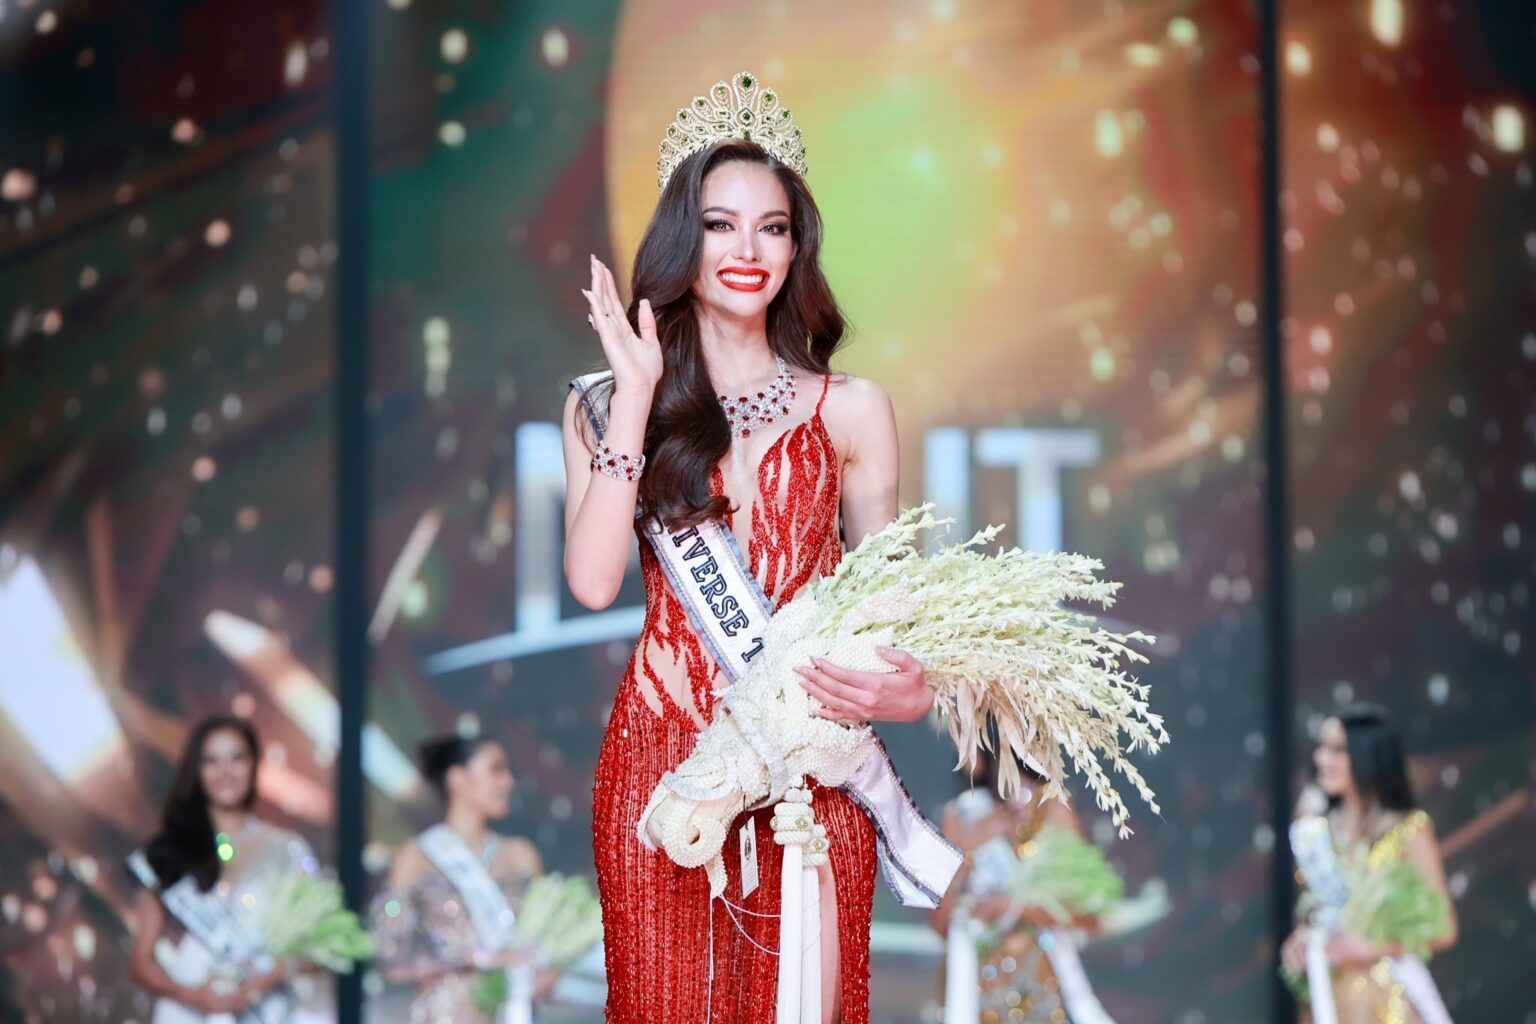 Anna Sueangamiam crowned Miss Universe Thailand 2022 staged in Bangkok